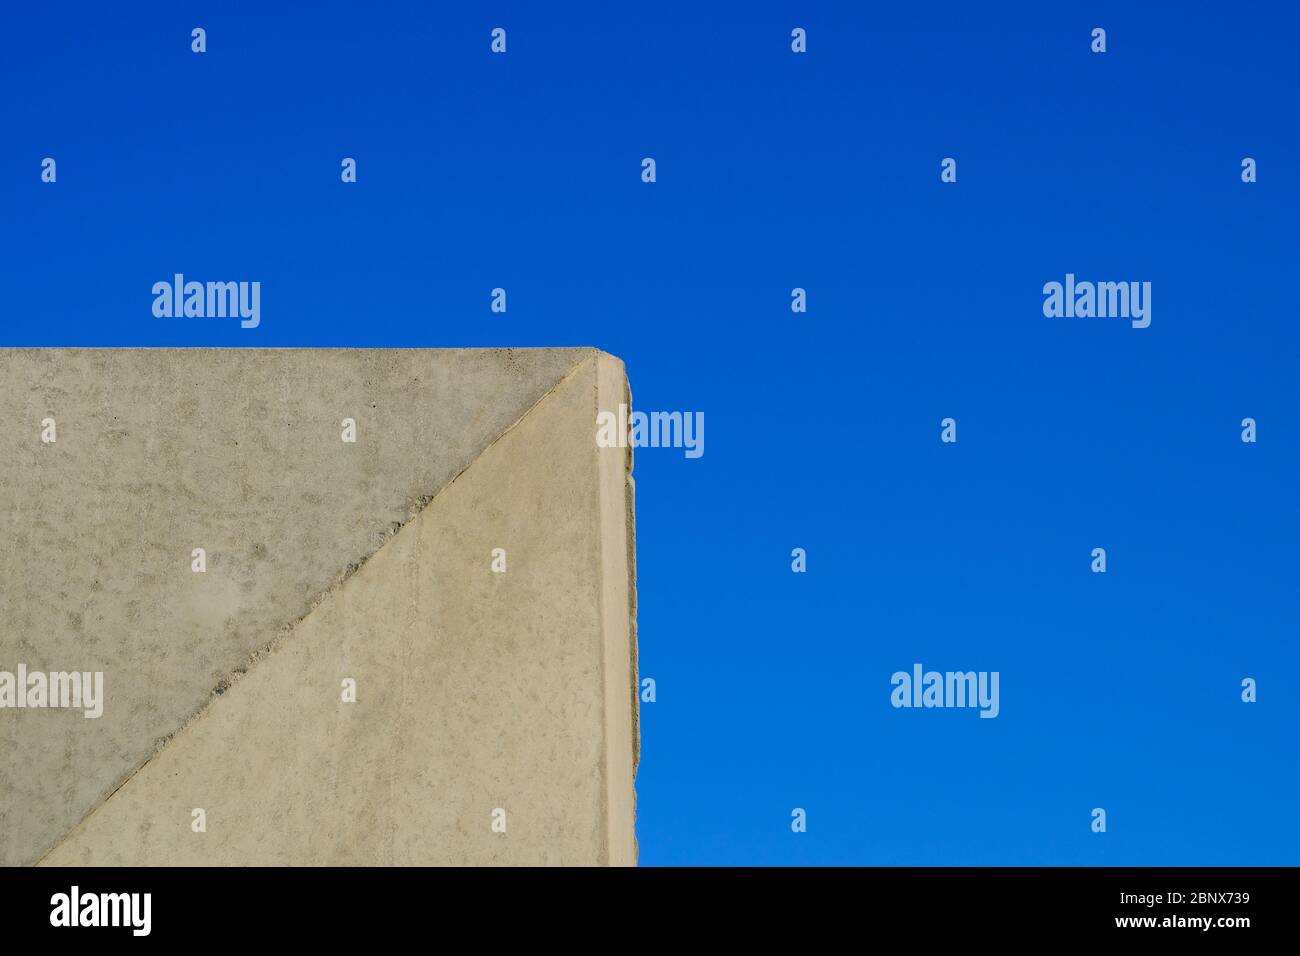 precast concrete panels, concrete footing with blue sky in background Stock Photo